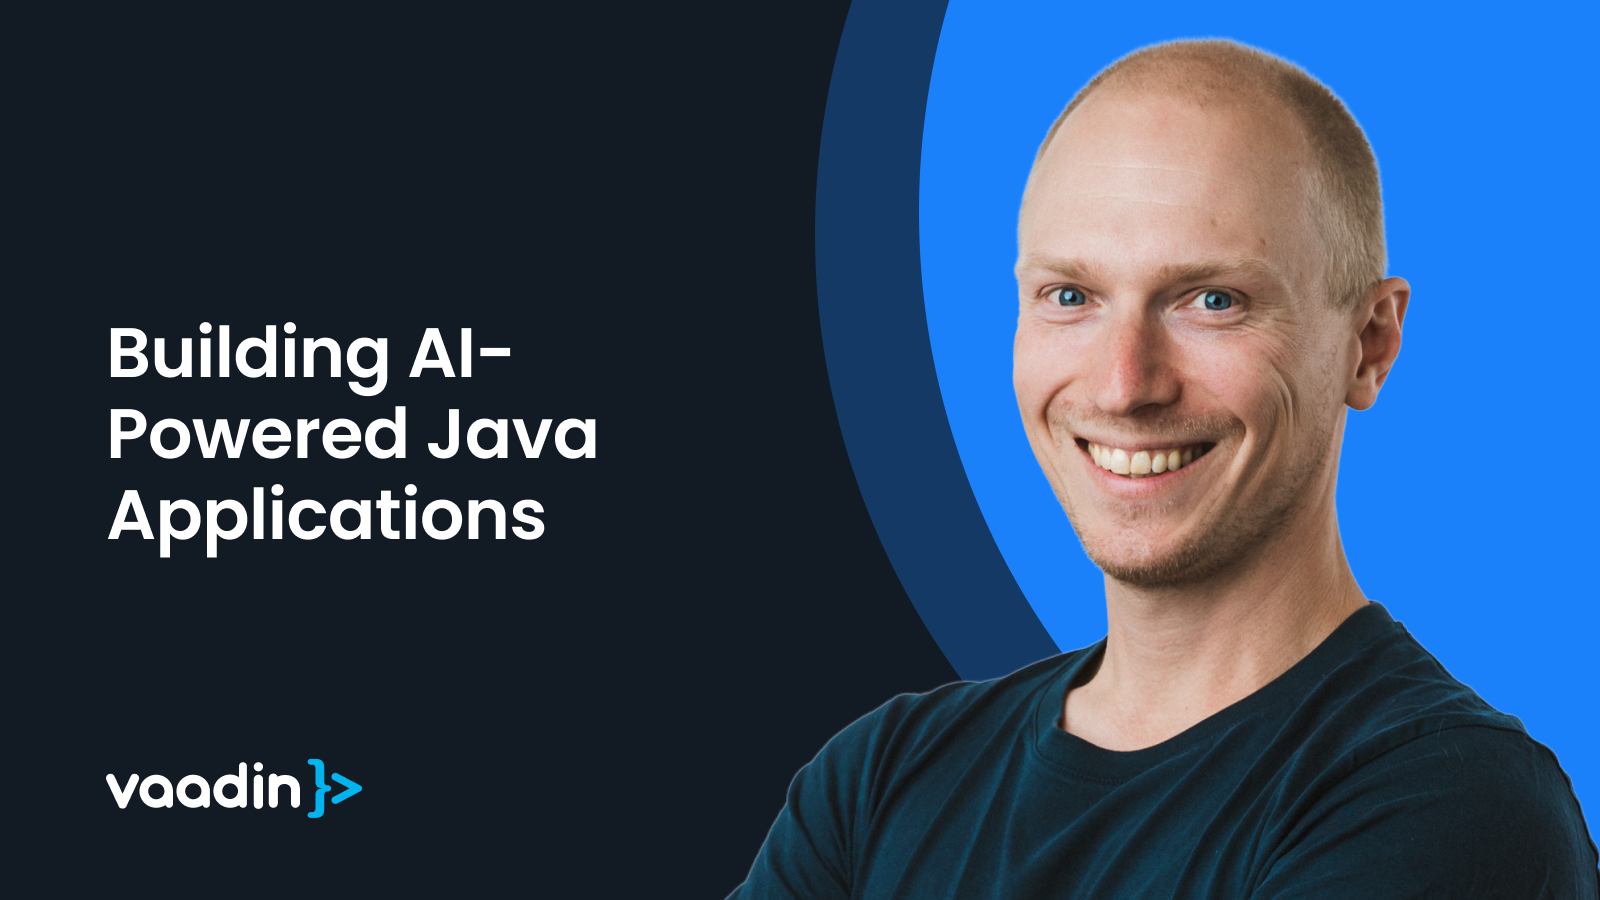 Building AI-Powered Java Applications